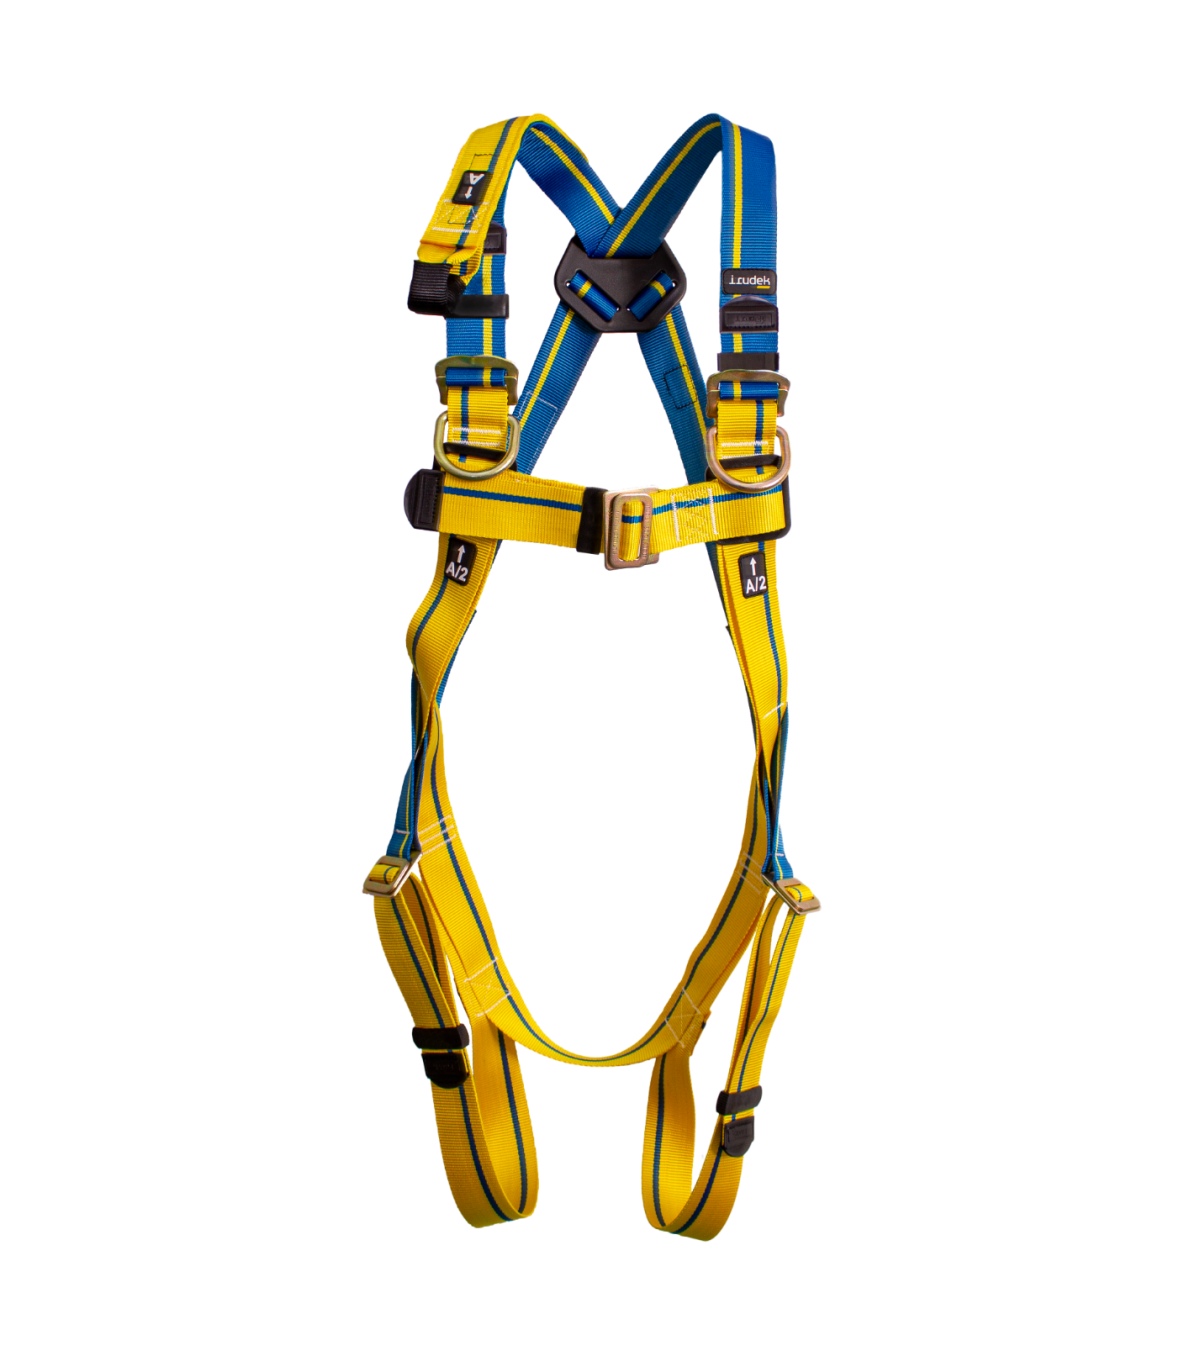 Fallguard Full Body Harness (EC-2) with Double Rope Lanyard Safety